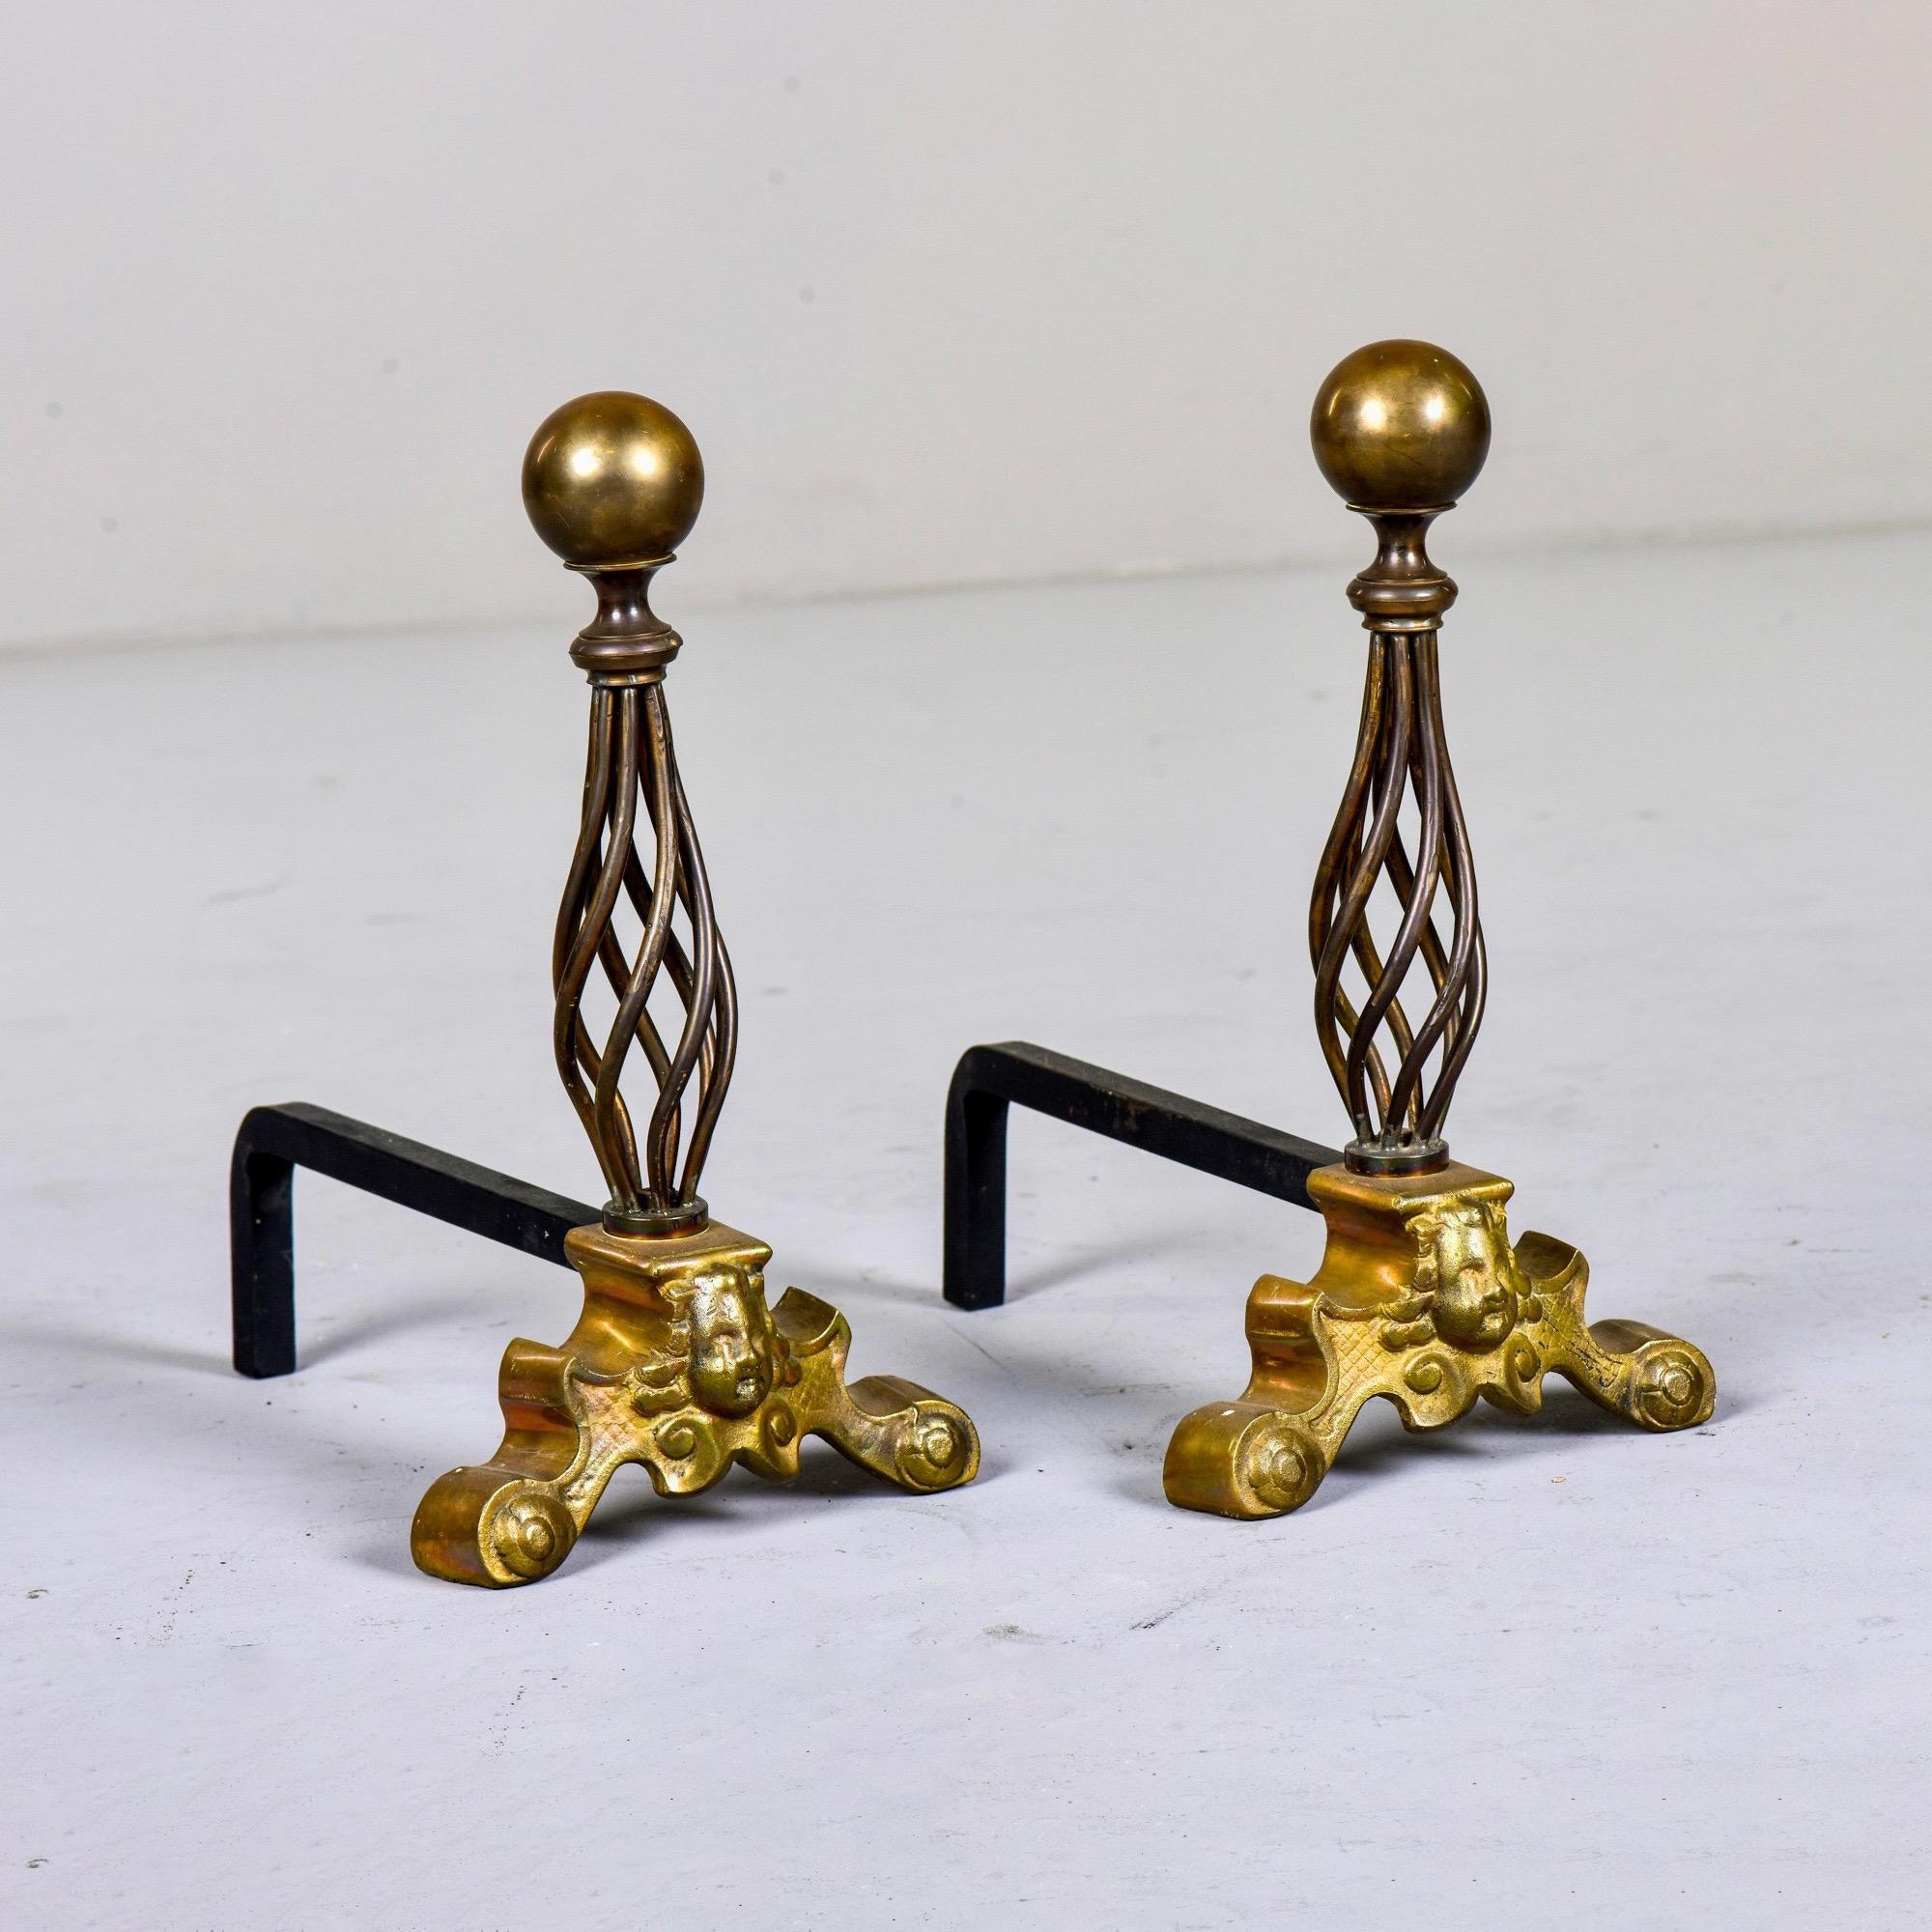 Found in France, this pair of circa 1940s andirons feature an iron base and gilded cherubs topped with an open work spiral of twisted brass strands and large round brass finials. Unknown maker. Sold and priced as a pair.